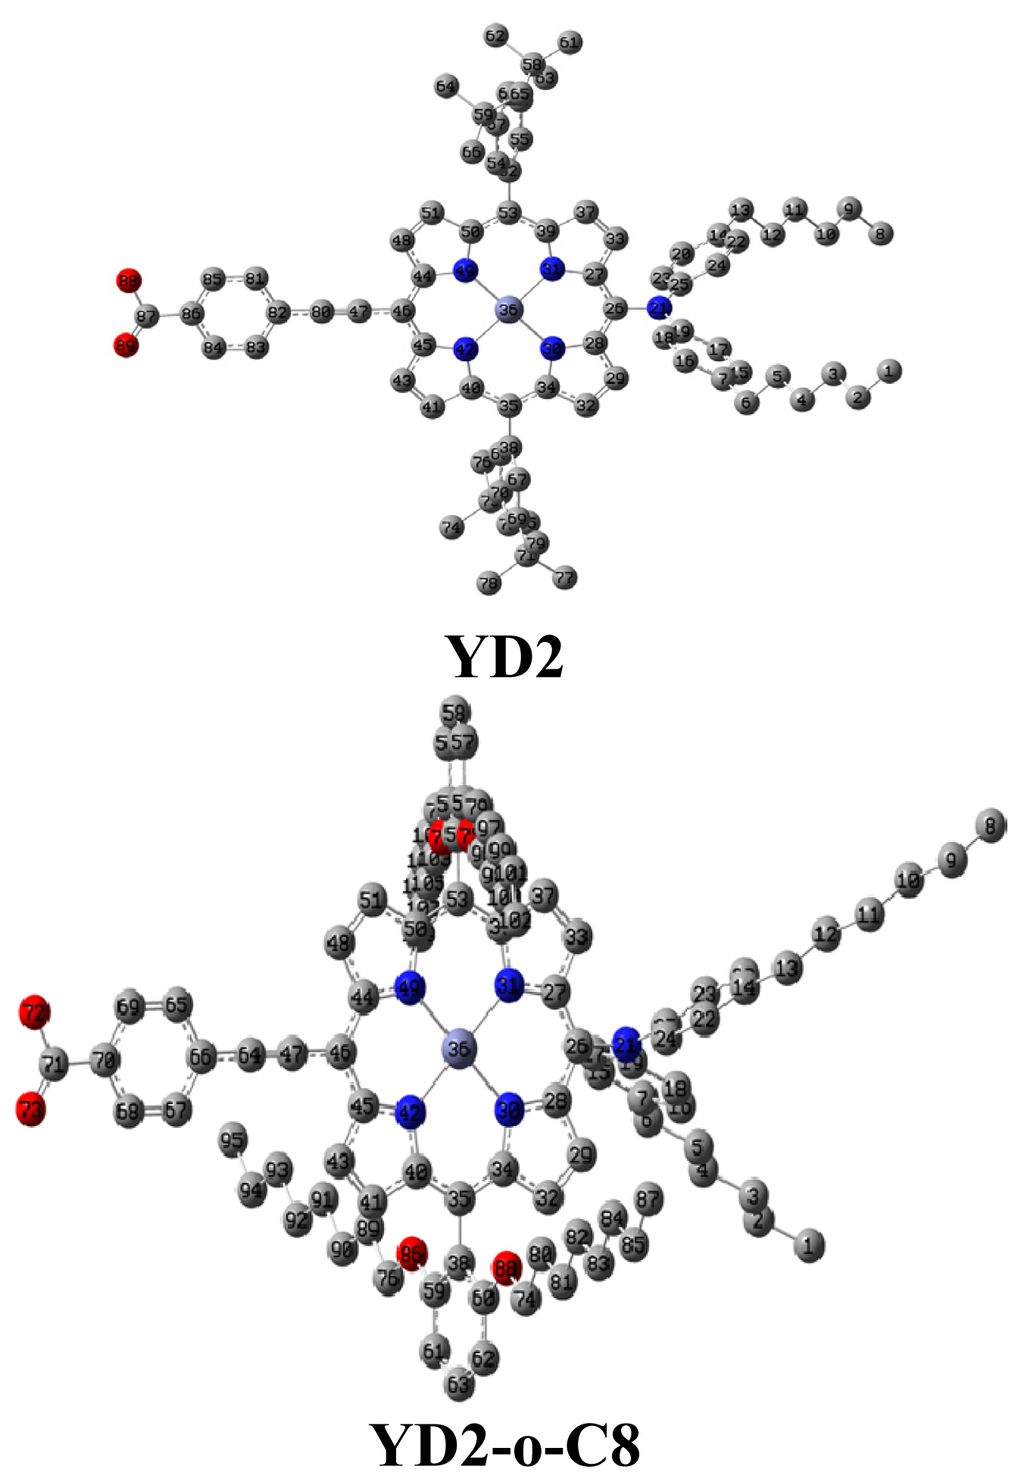 IJMS | Free Full-Text | Understanding the Electronic Structures and  Absorption Properties of Porphyrin Sensitizers YD2 and YD2-o-C8 for  Dye-Sensitized Solar Cells | HTML